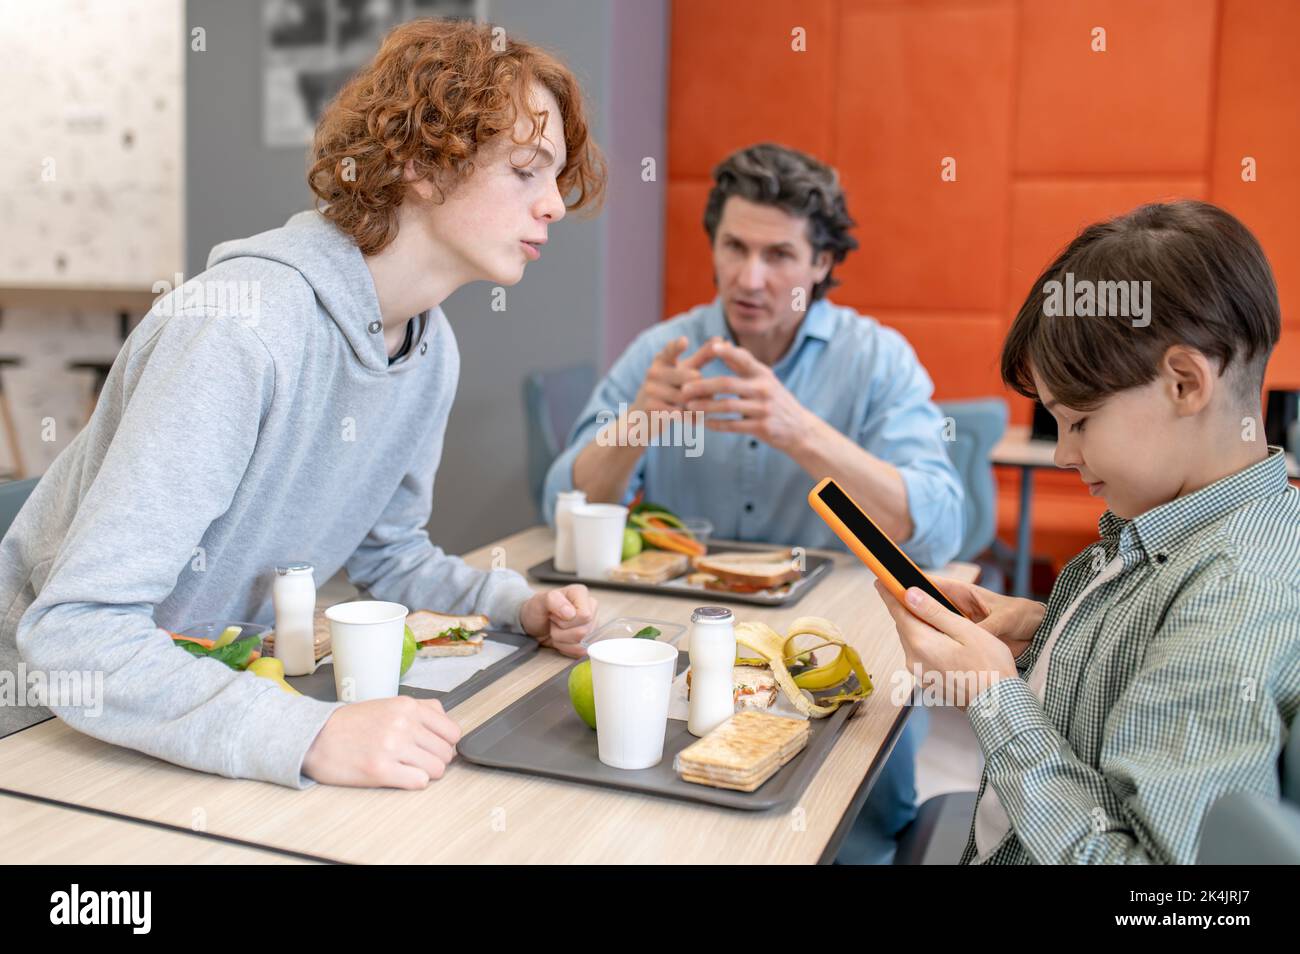 Schoolteacher conversing with two schoolboys at lunch Stock Photo